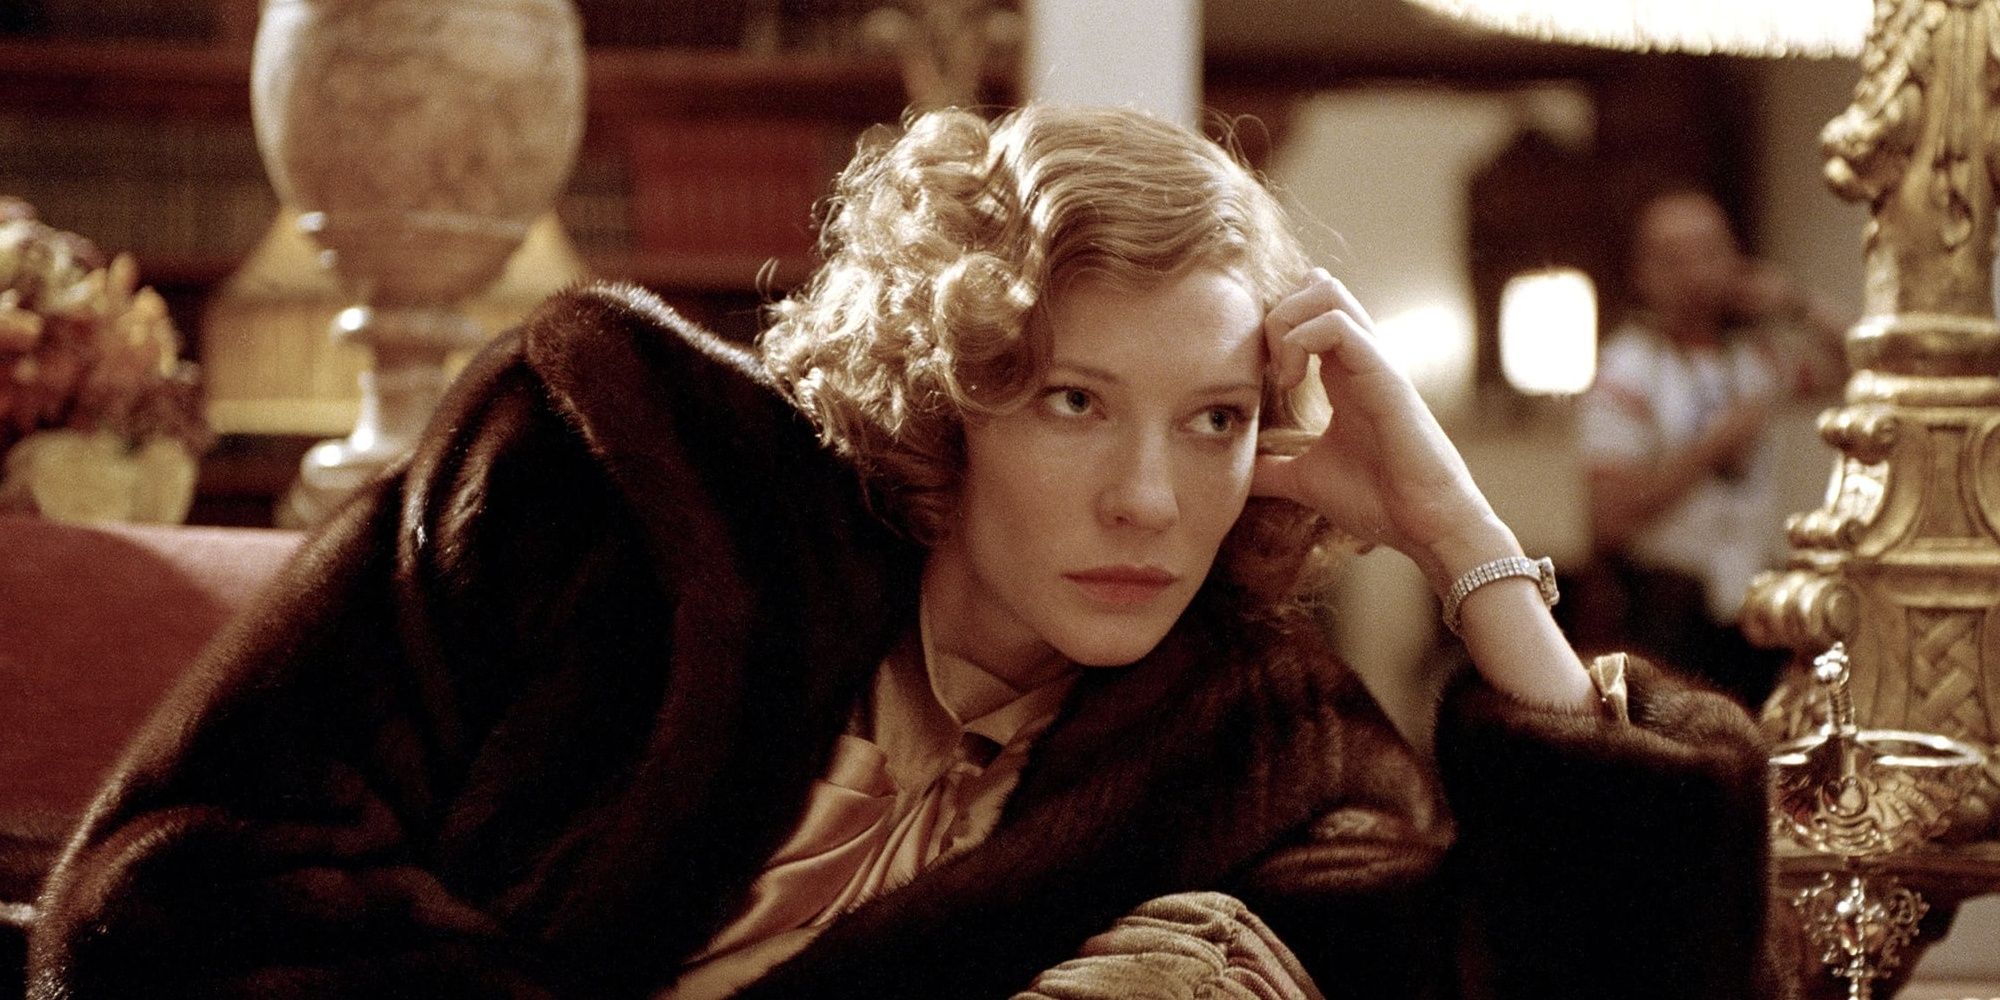 Cate Blanchett as Katharine Hepburn leaning her head on her hand and looking worried in The Aviator.